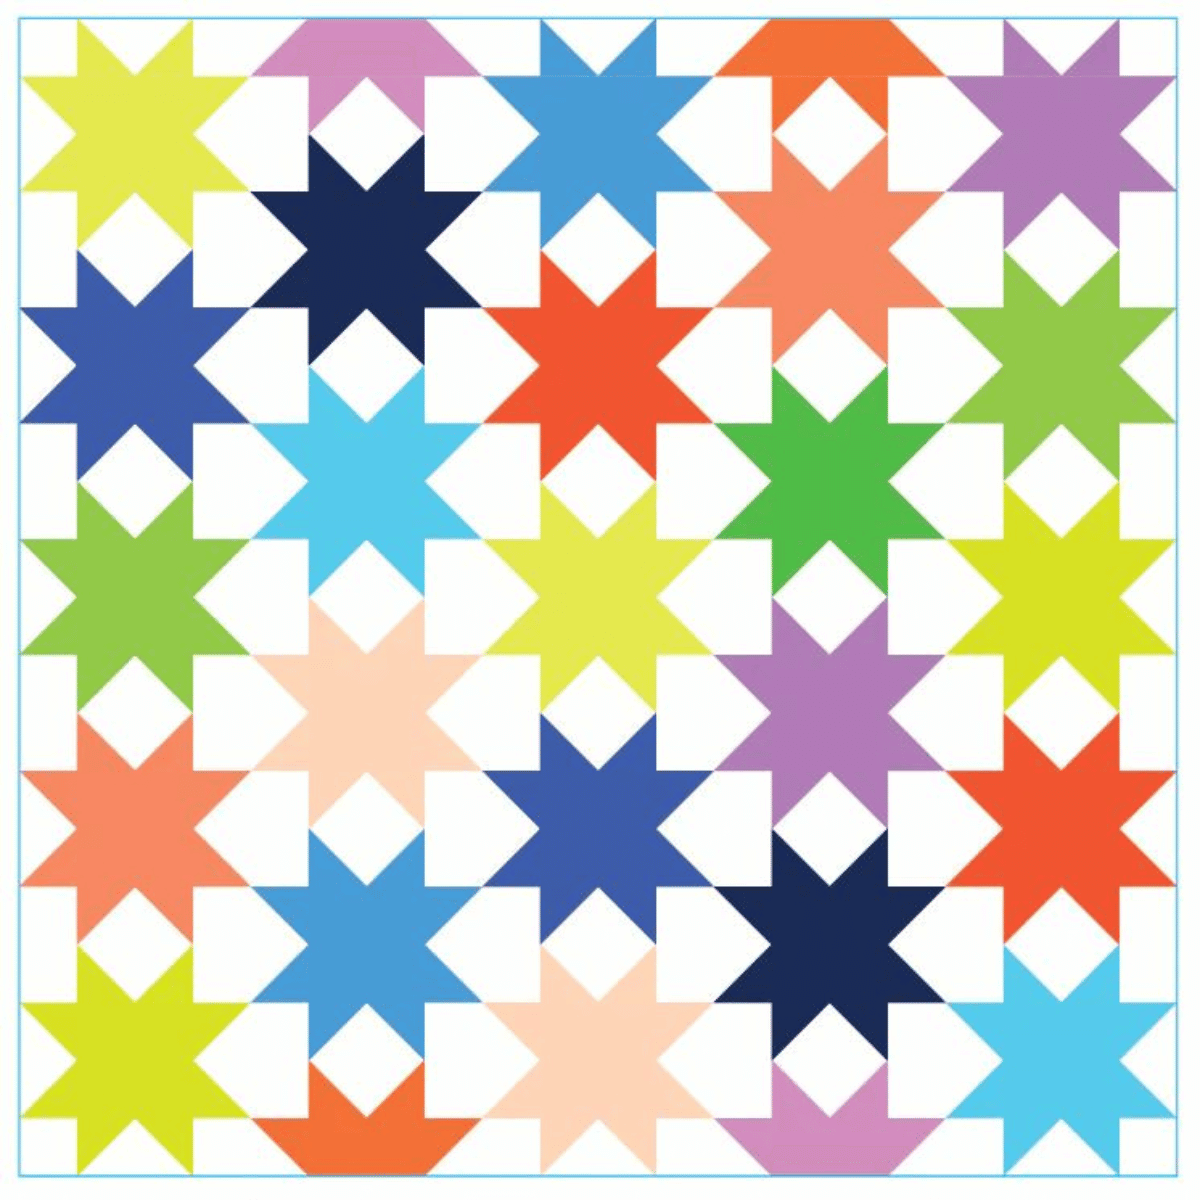 quilt made from evenly spaces sawtooth stars in bright colors